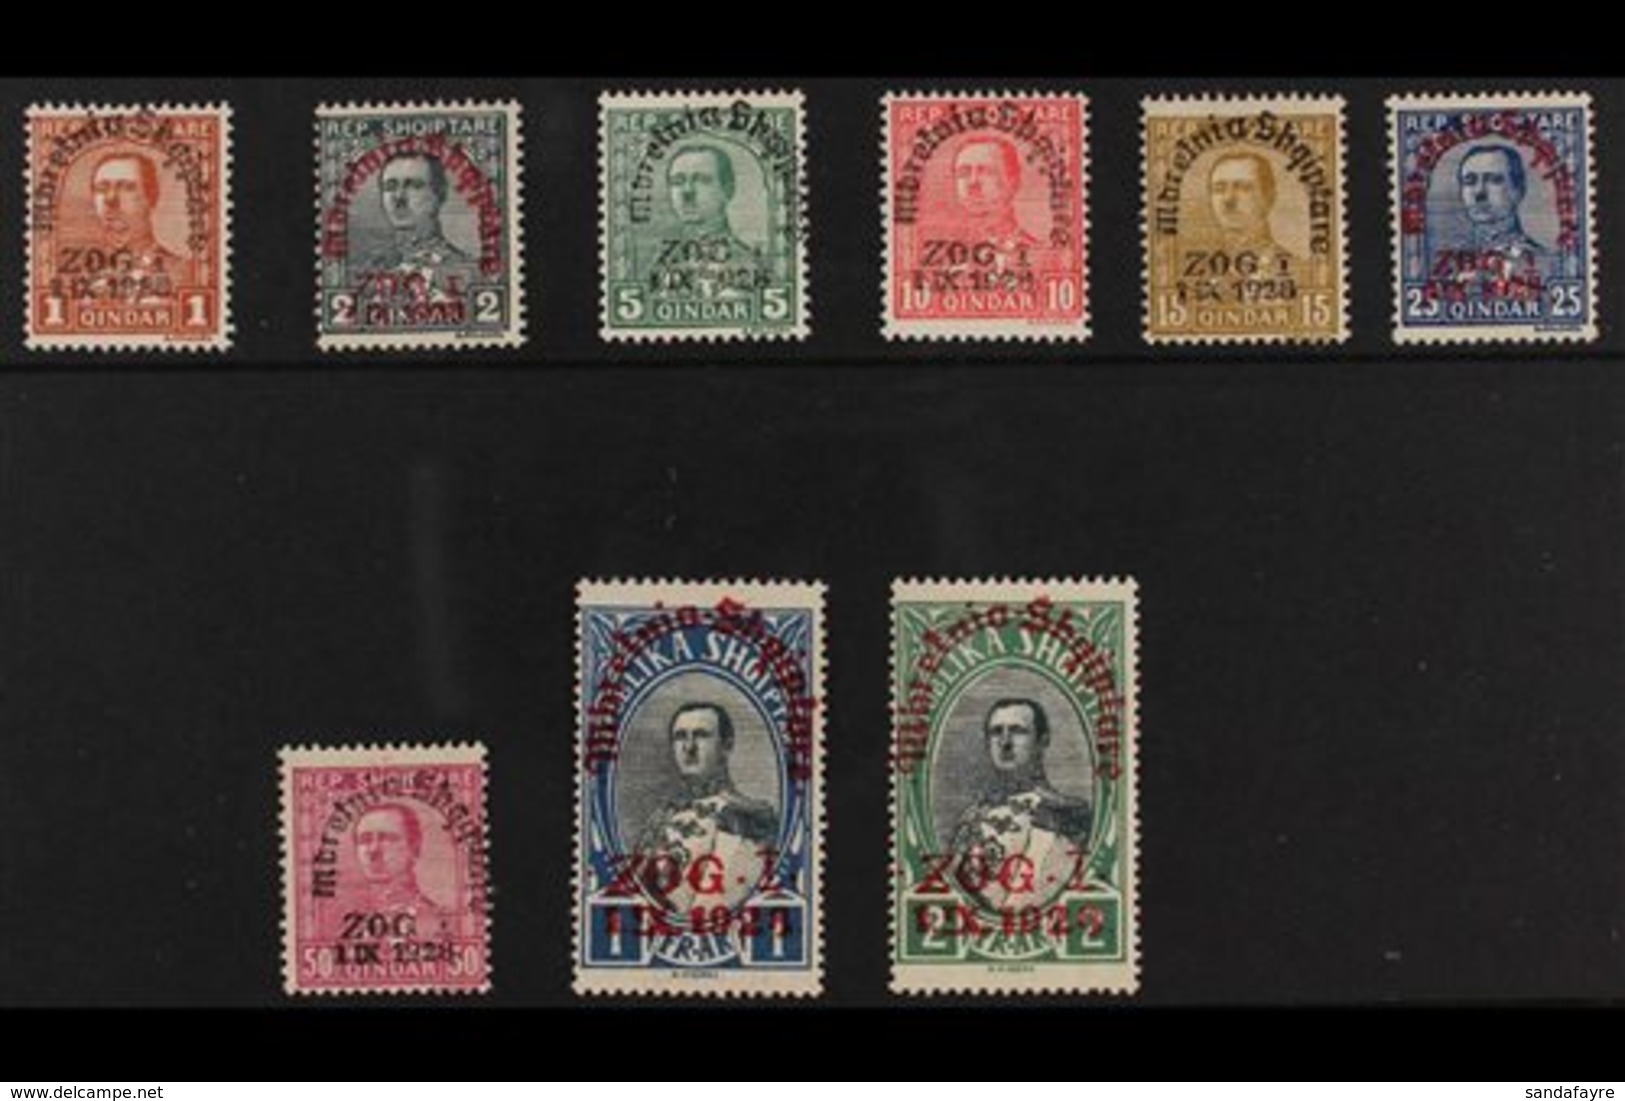 1928 Accession Overprints Complete Set (Michel 179/87, SG 239/47), Fine Mint Mostly Never Hinged, Very Fresh. (9 Stamps) - Albanien